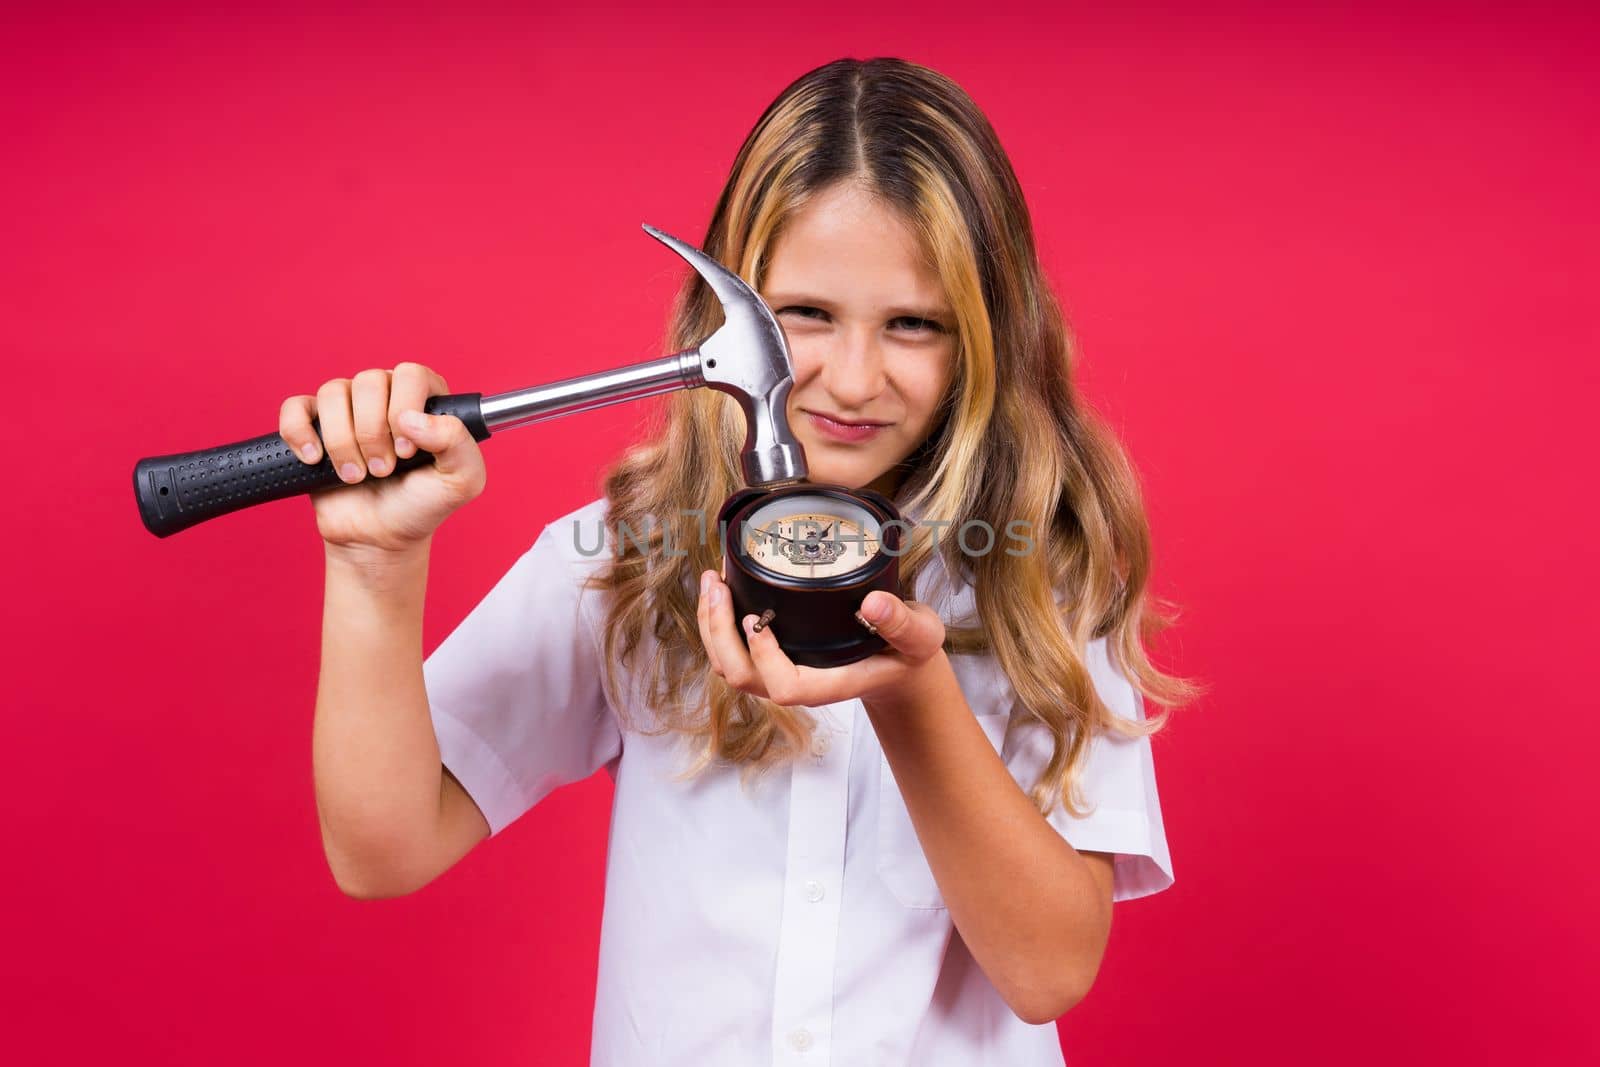 Kid girl holding hammer and alarm clock smiling with a happy and cool smile on face. showing teeth. by Zelenin